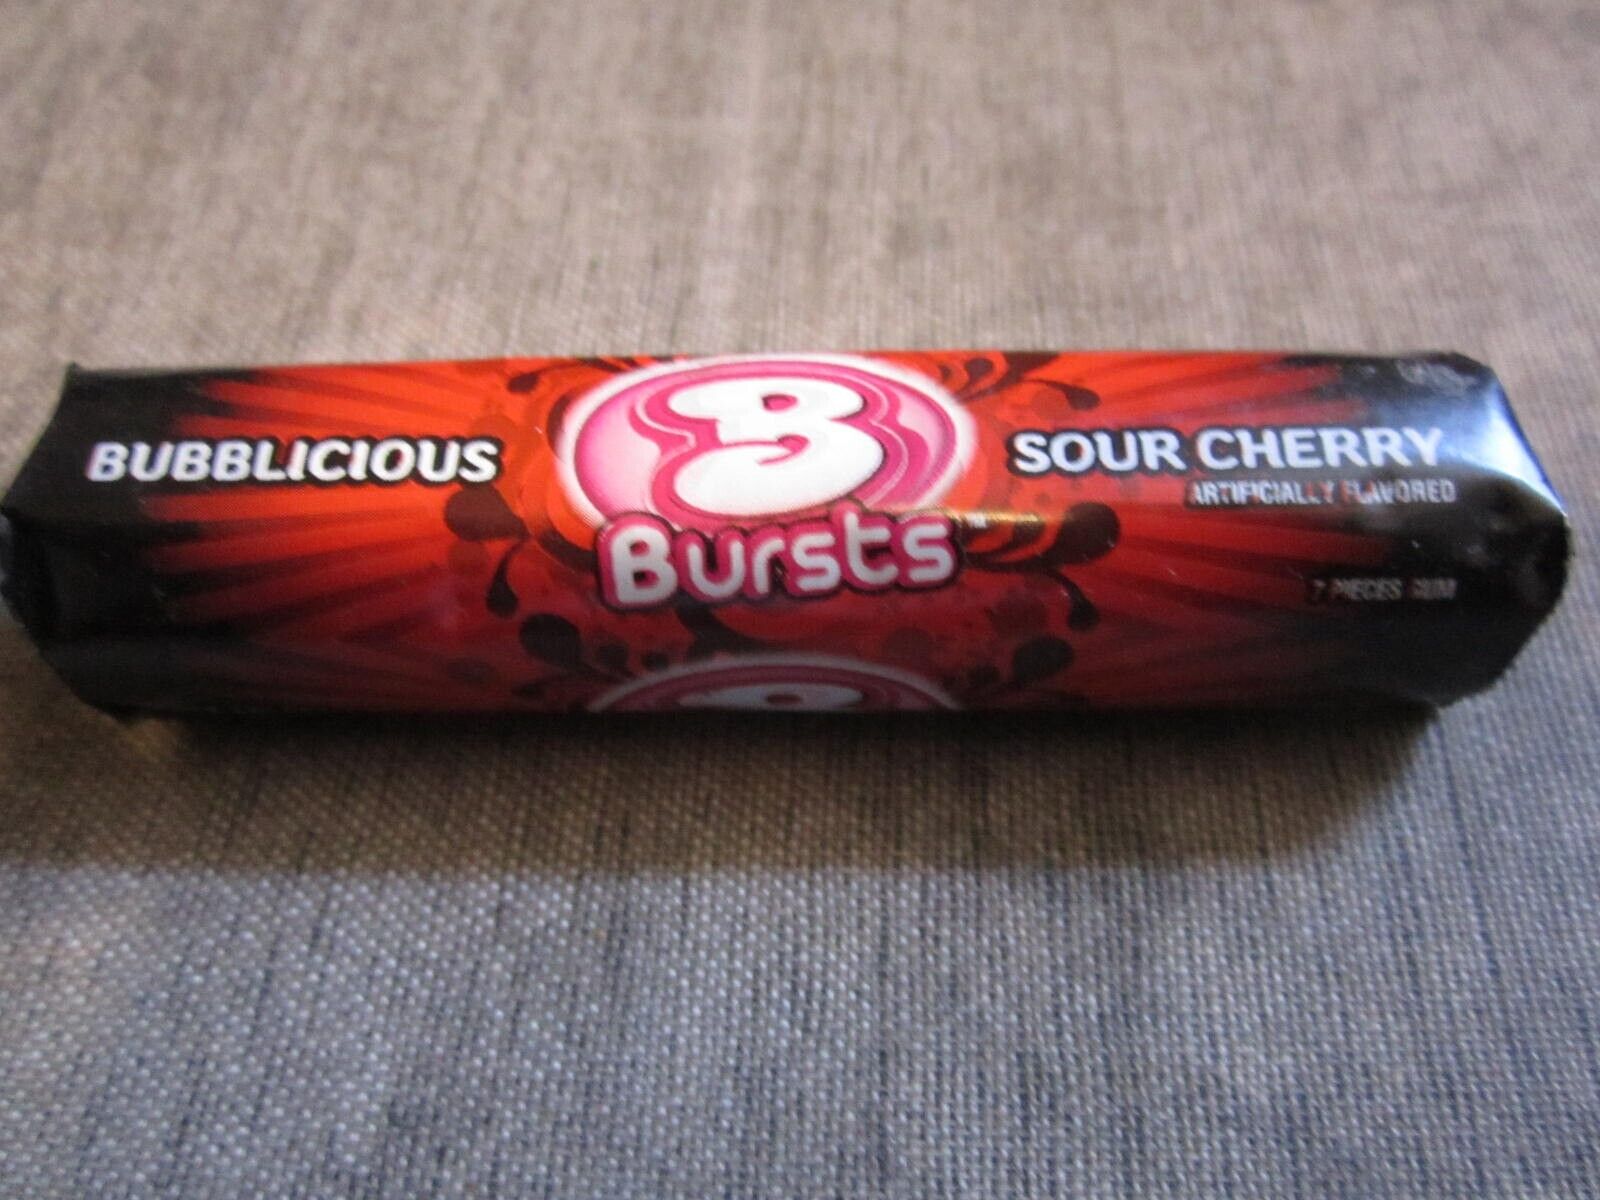 Bubblicious Sour Cherry Gum 1 sealed collector pack Scarce Collectible